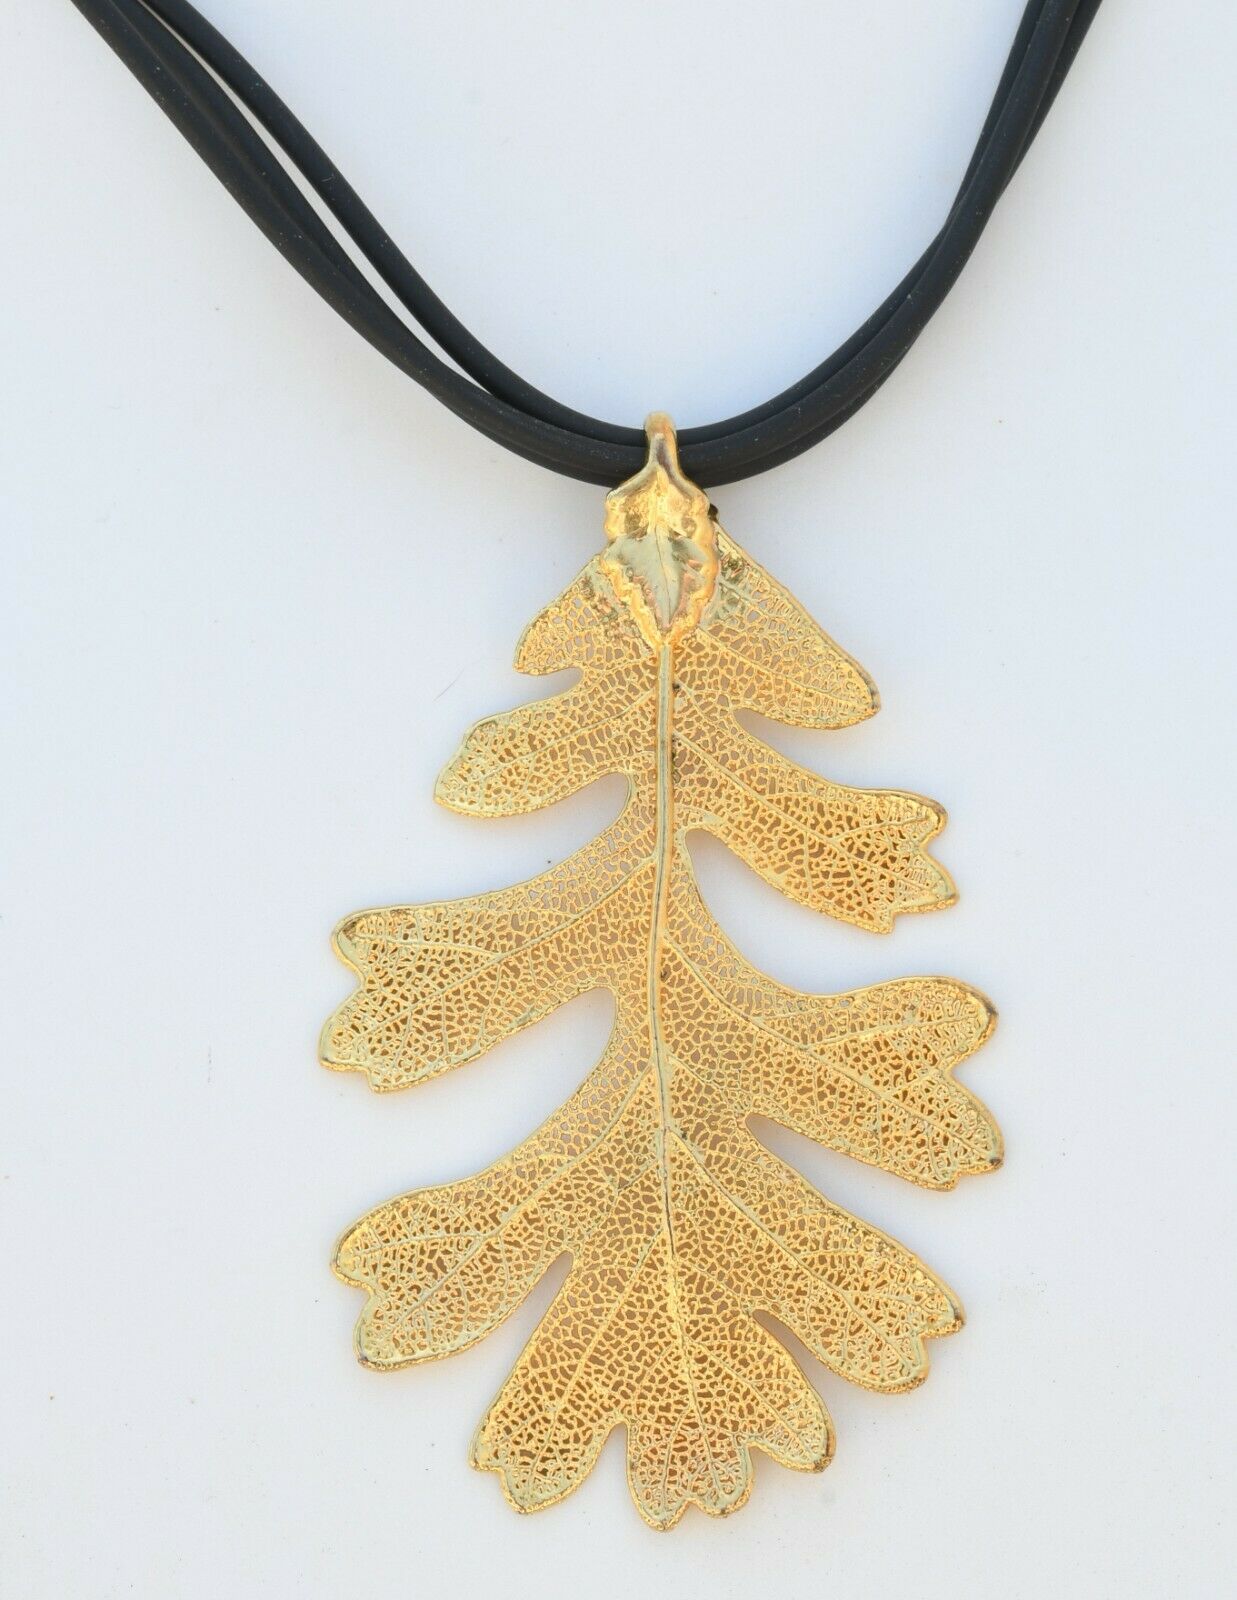 Collar Gold Plated Leaf With Leather Stripes 40 Cm Long Handmade